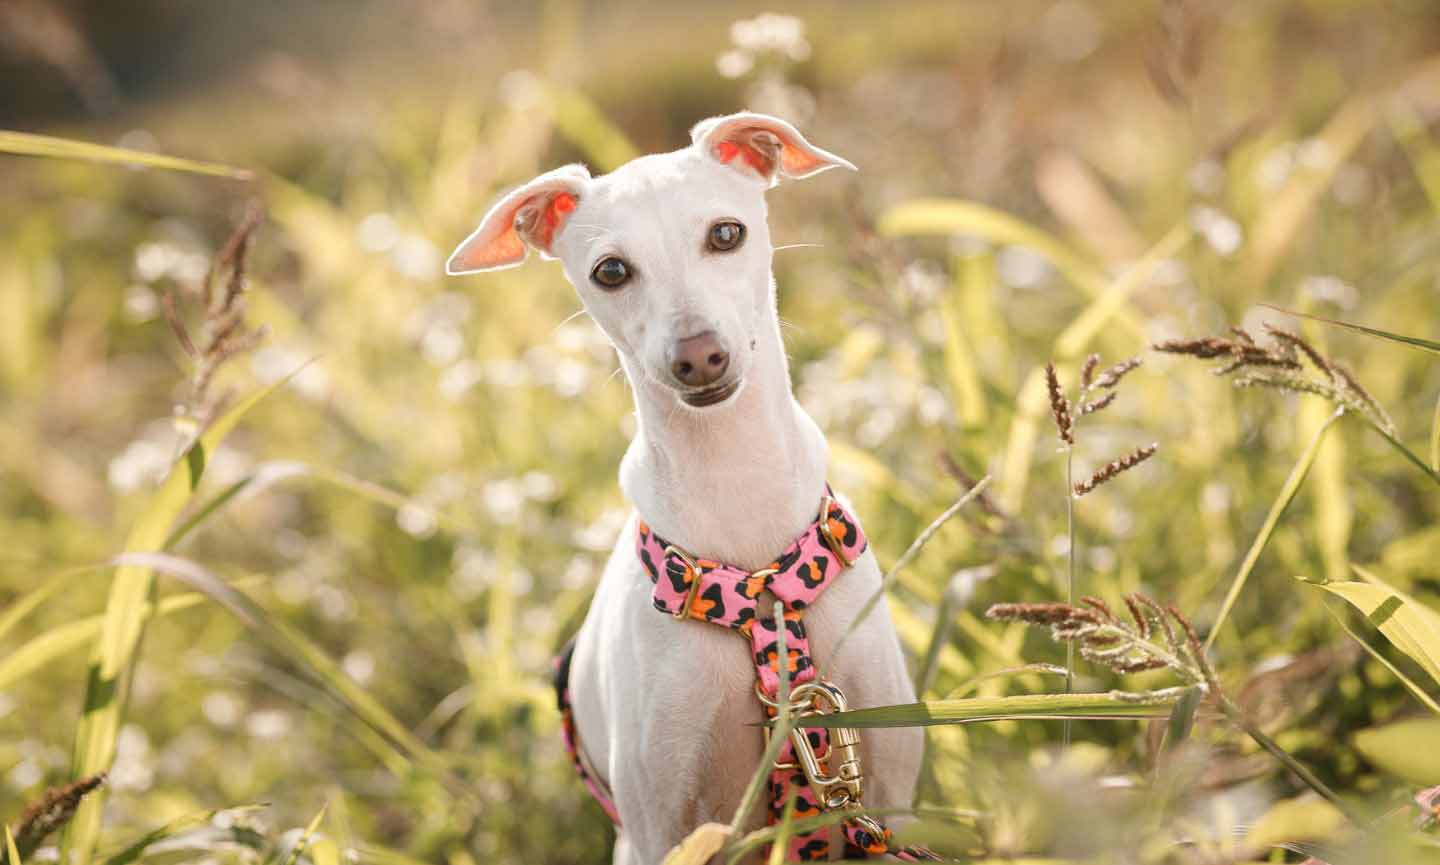 Which Dog Breed Are You Based On Your Gucci Preferences?